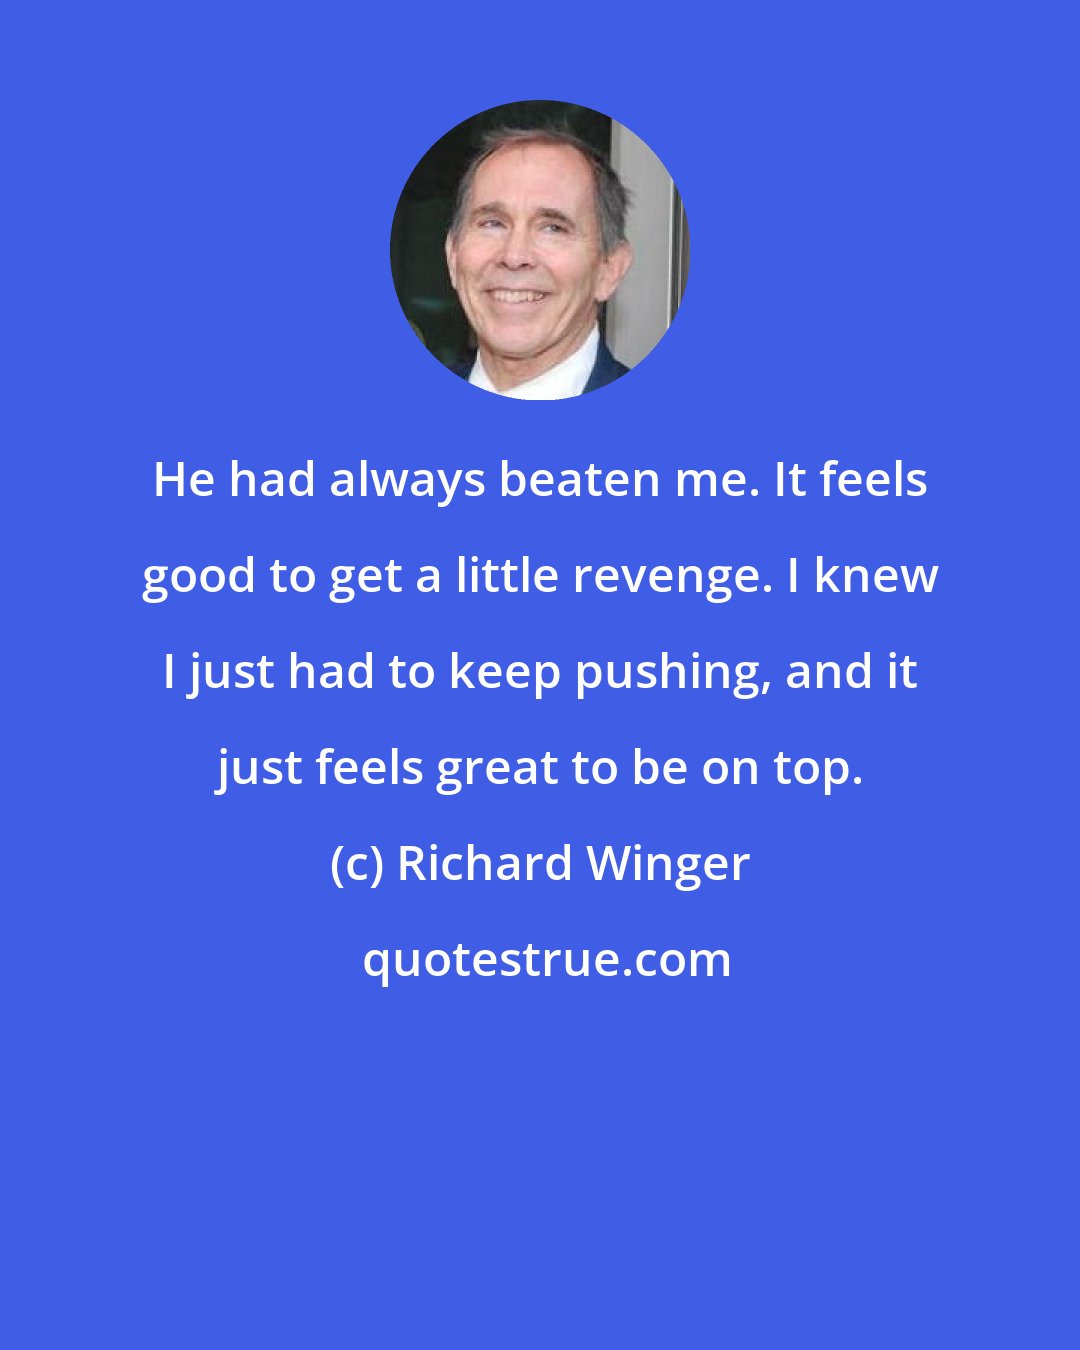 Richard Winger: He had always beaten me. It feels good to get a little revenge. I knew I just had to keep pushing, and it just feels great to be on top.